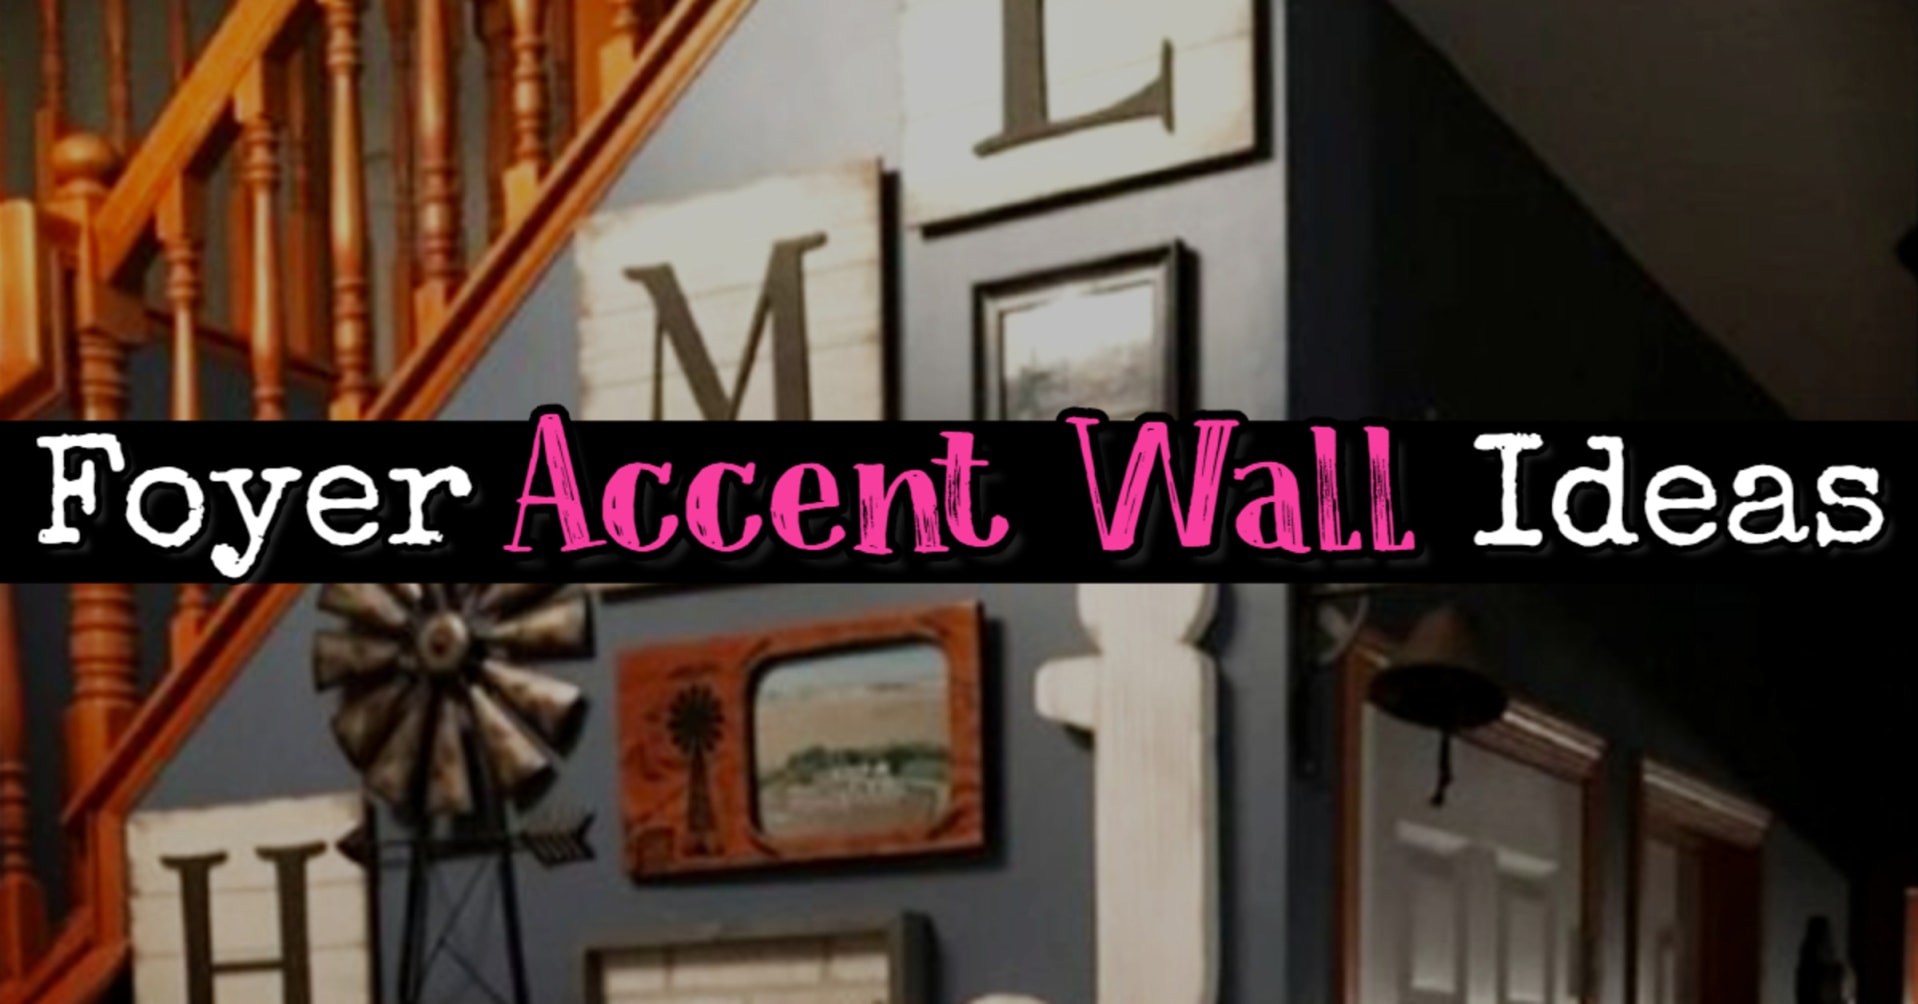 Foyer Accent Wall Ideas - Easy DIY decorating ideas for entry hall wall PICTURES and foyer decor inspiration to copy! 